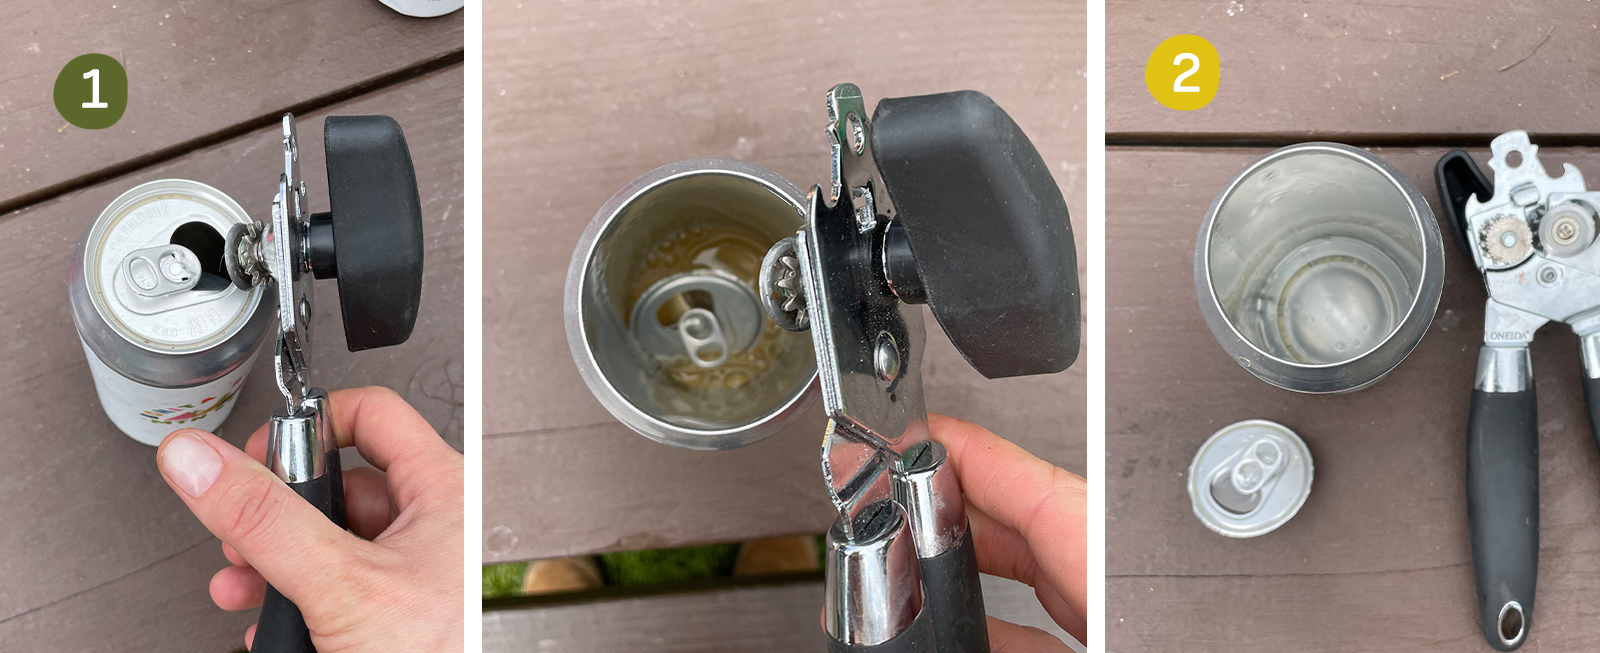 Use can opener to remove the top of the can, wash out can, add  clean water.